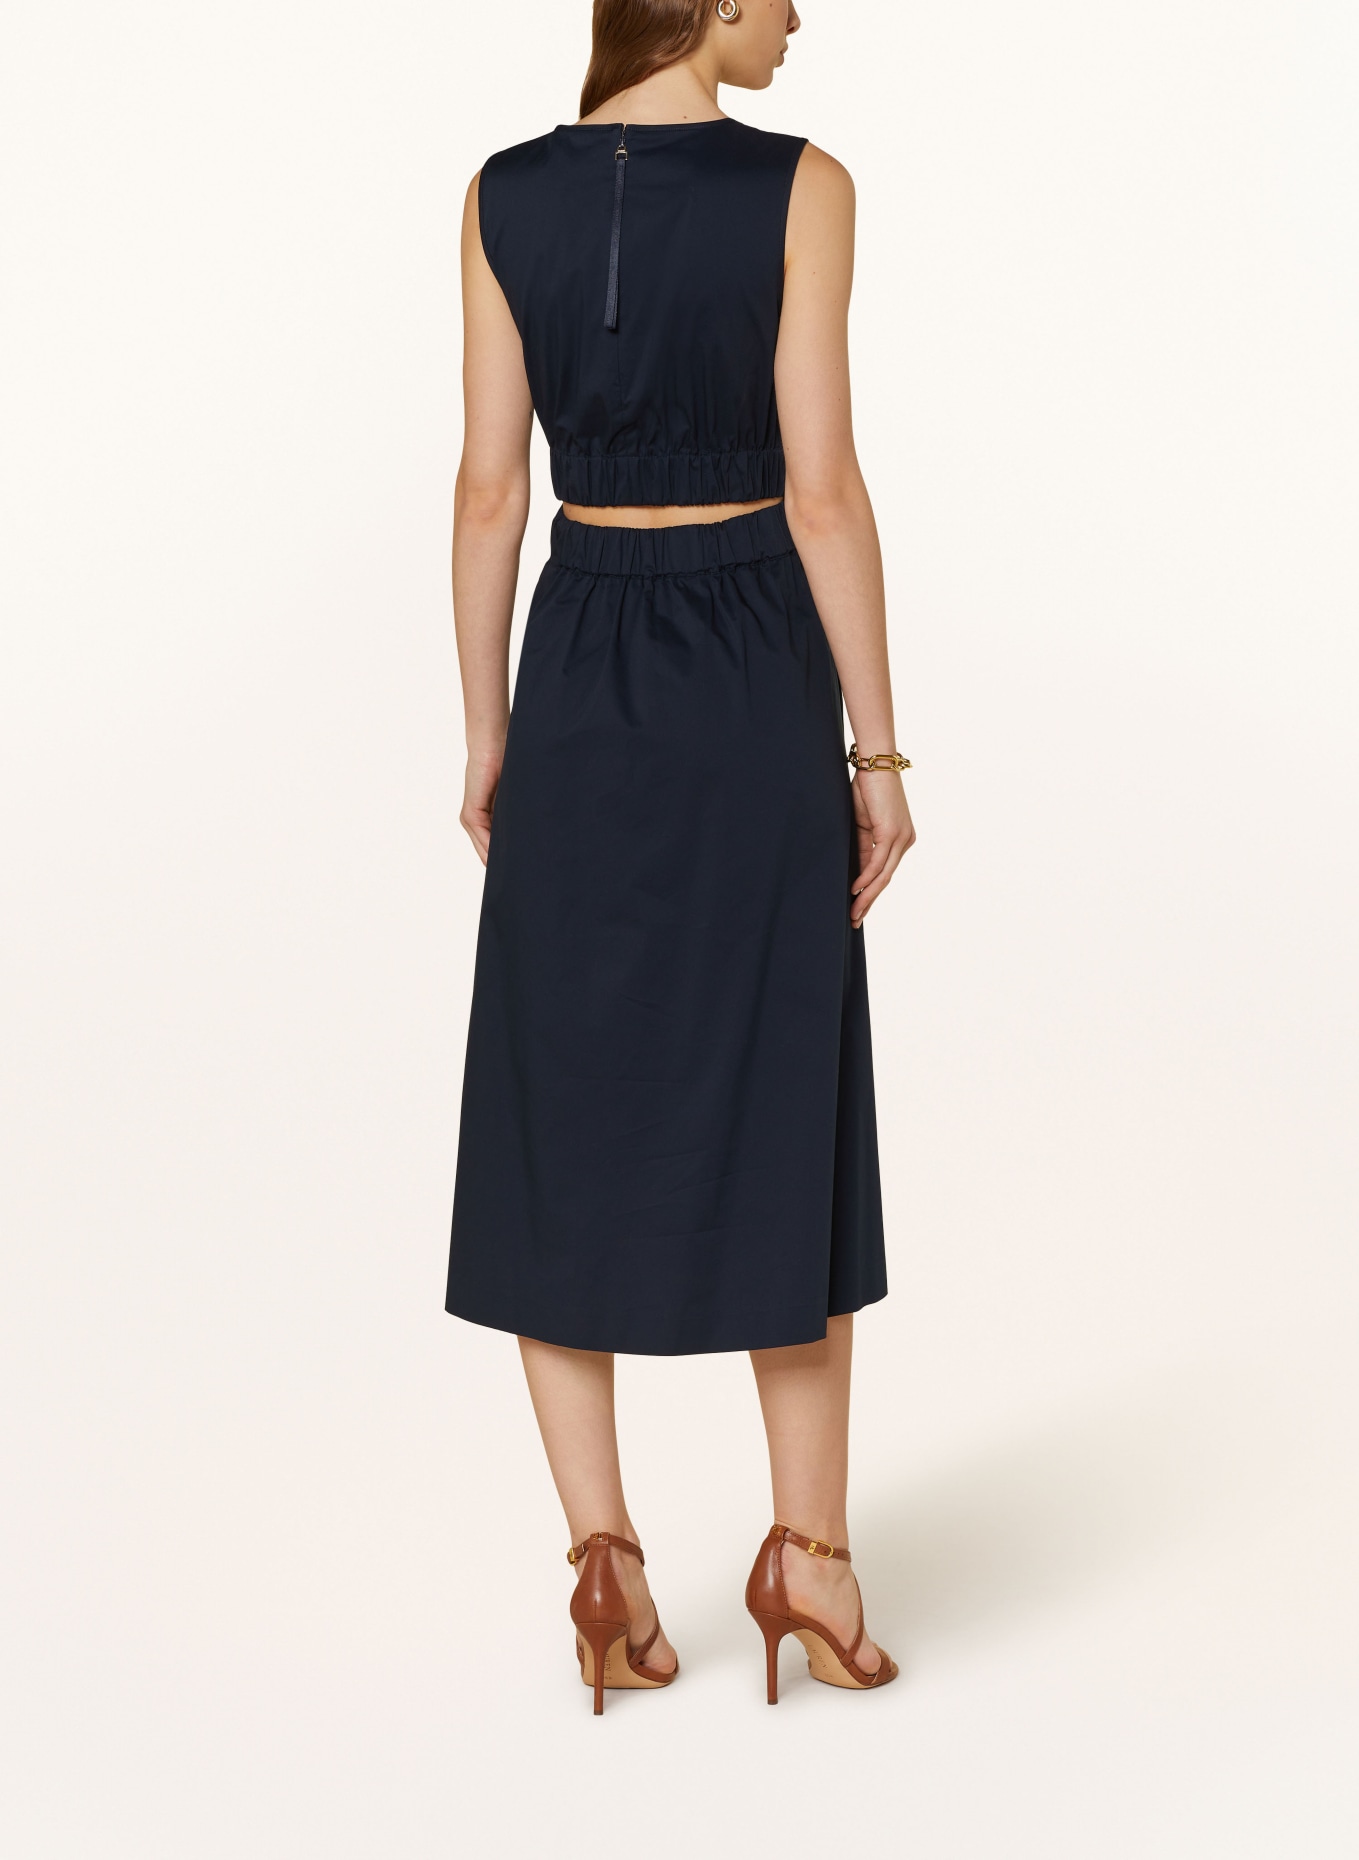 JOOP! Dress with cut-out, Color: DARK BLUE (Image 3)